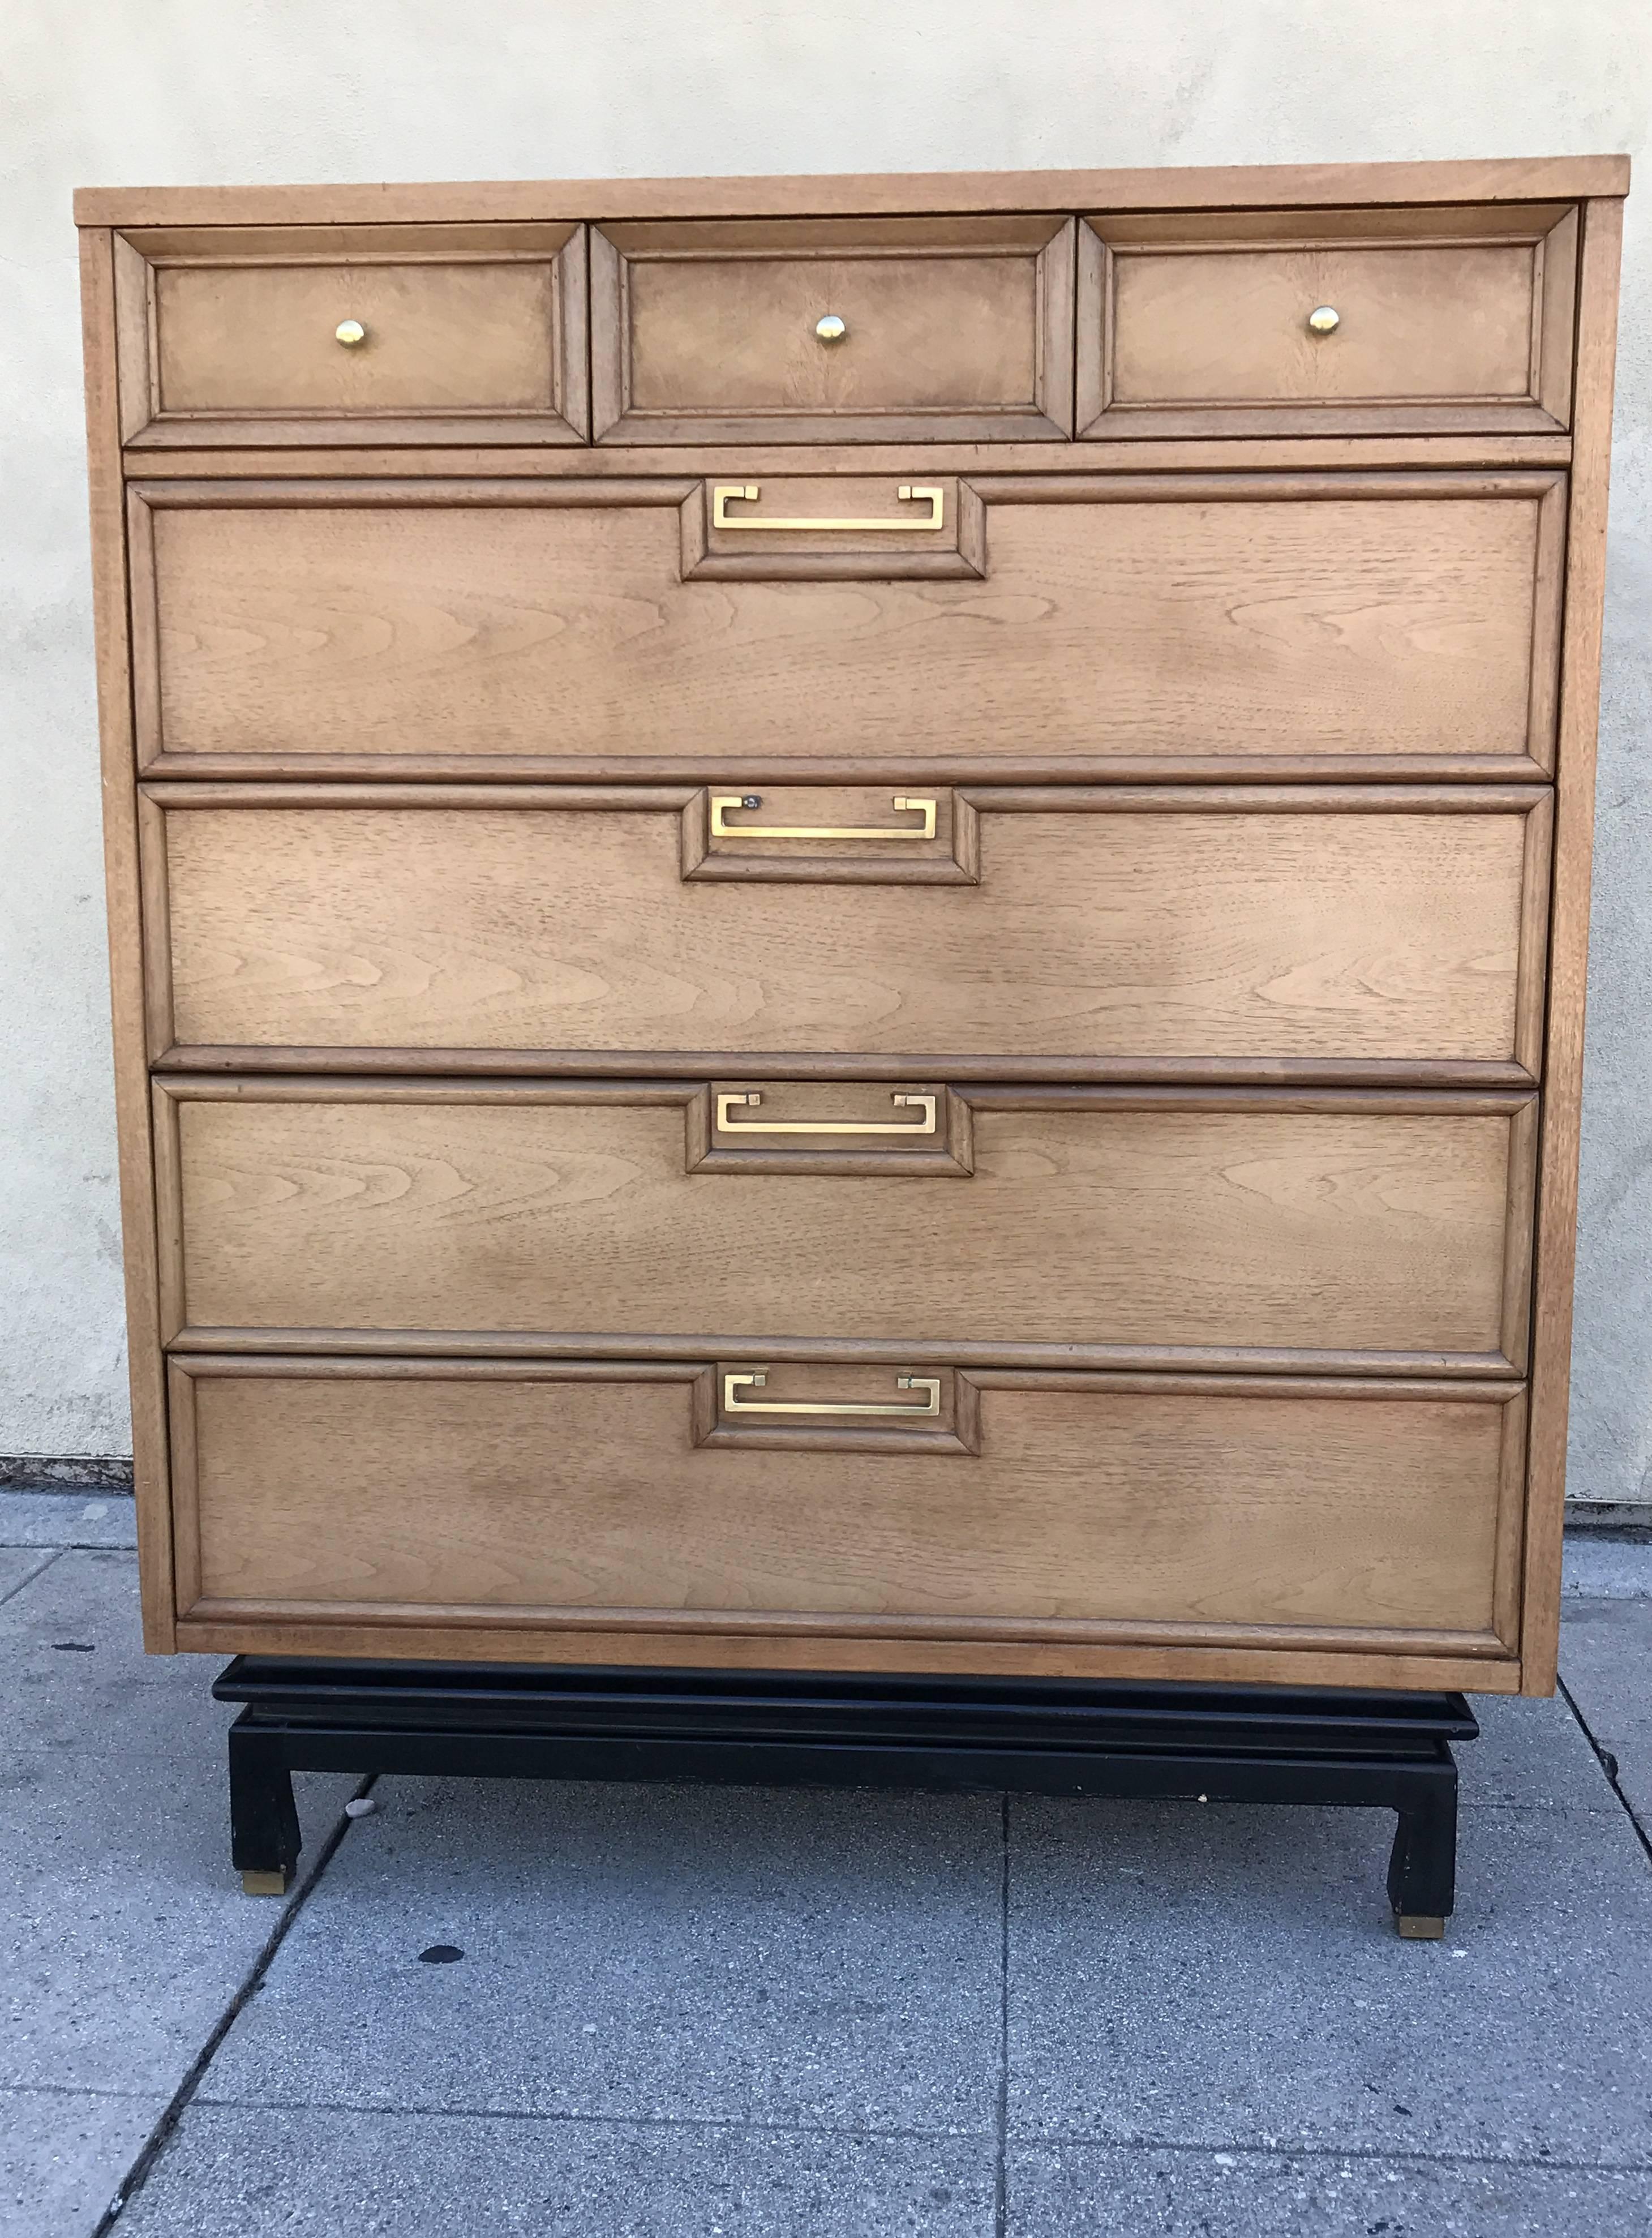 1960s walnut tall boy from Americans of Martinsville. Top section divided into three separate drawers with four larger drawers below. Brass knobs and handles. The base is black stained walnut.